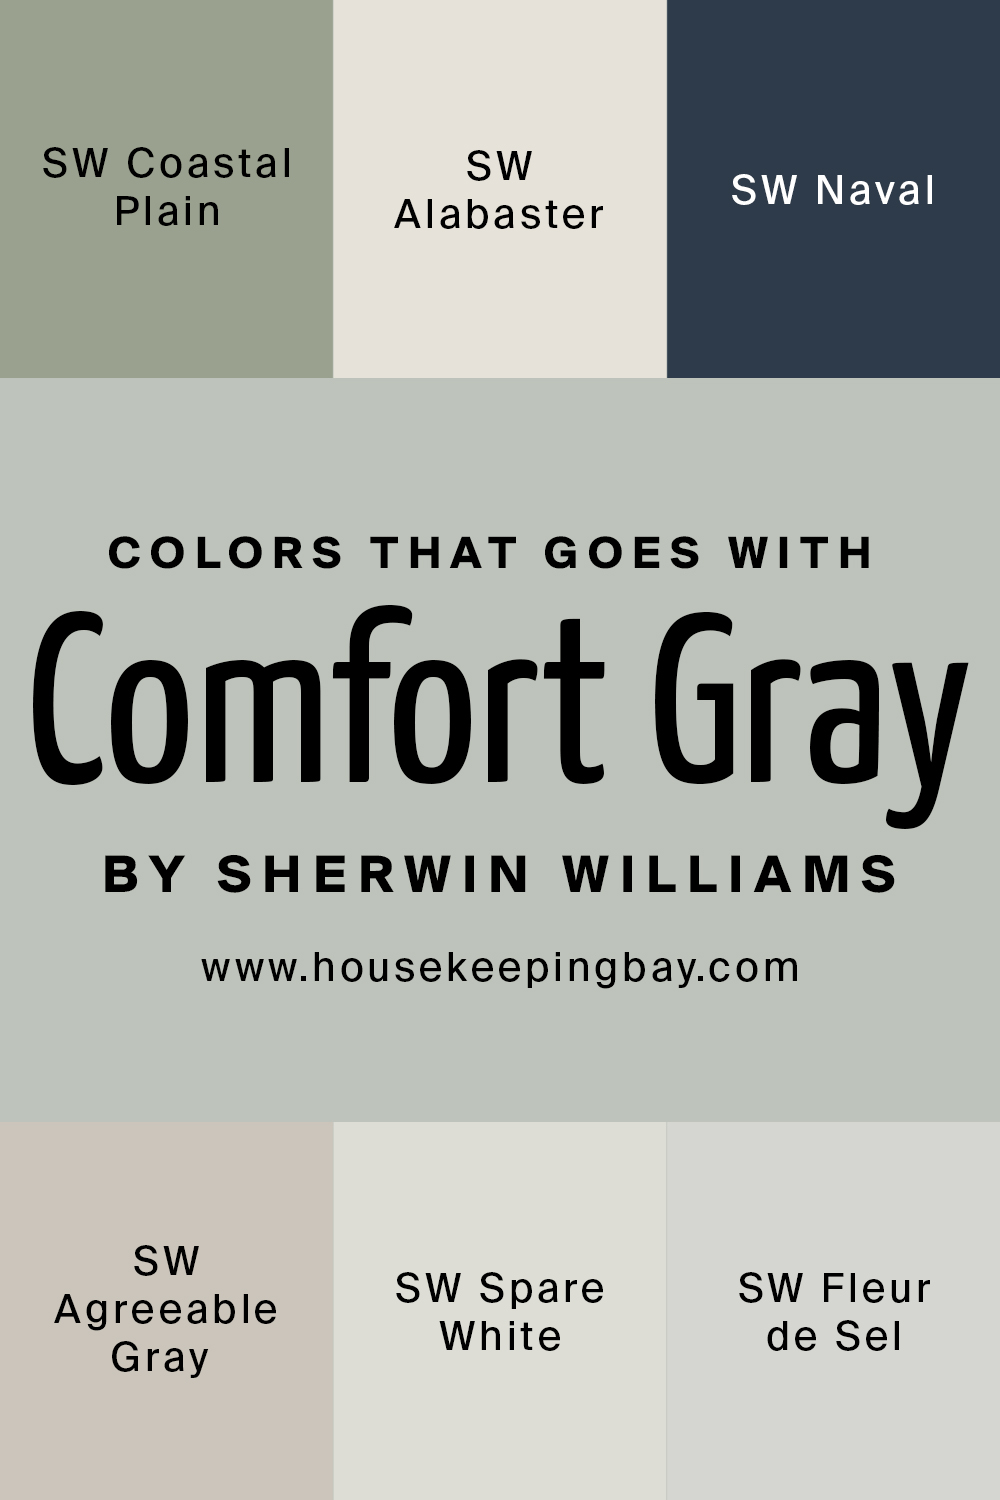 Colors that goes with Comfort Gray by Sherwin Williams